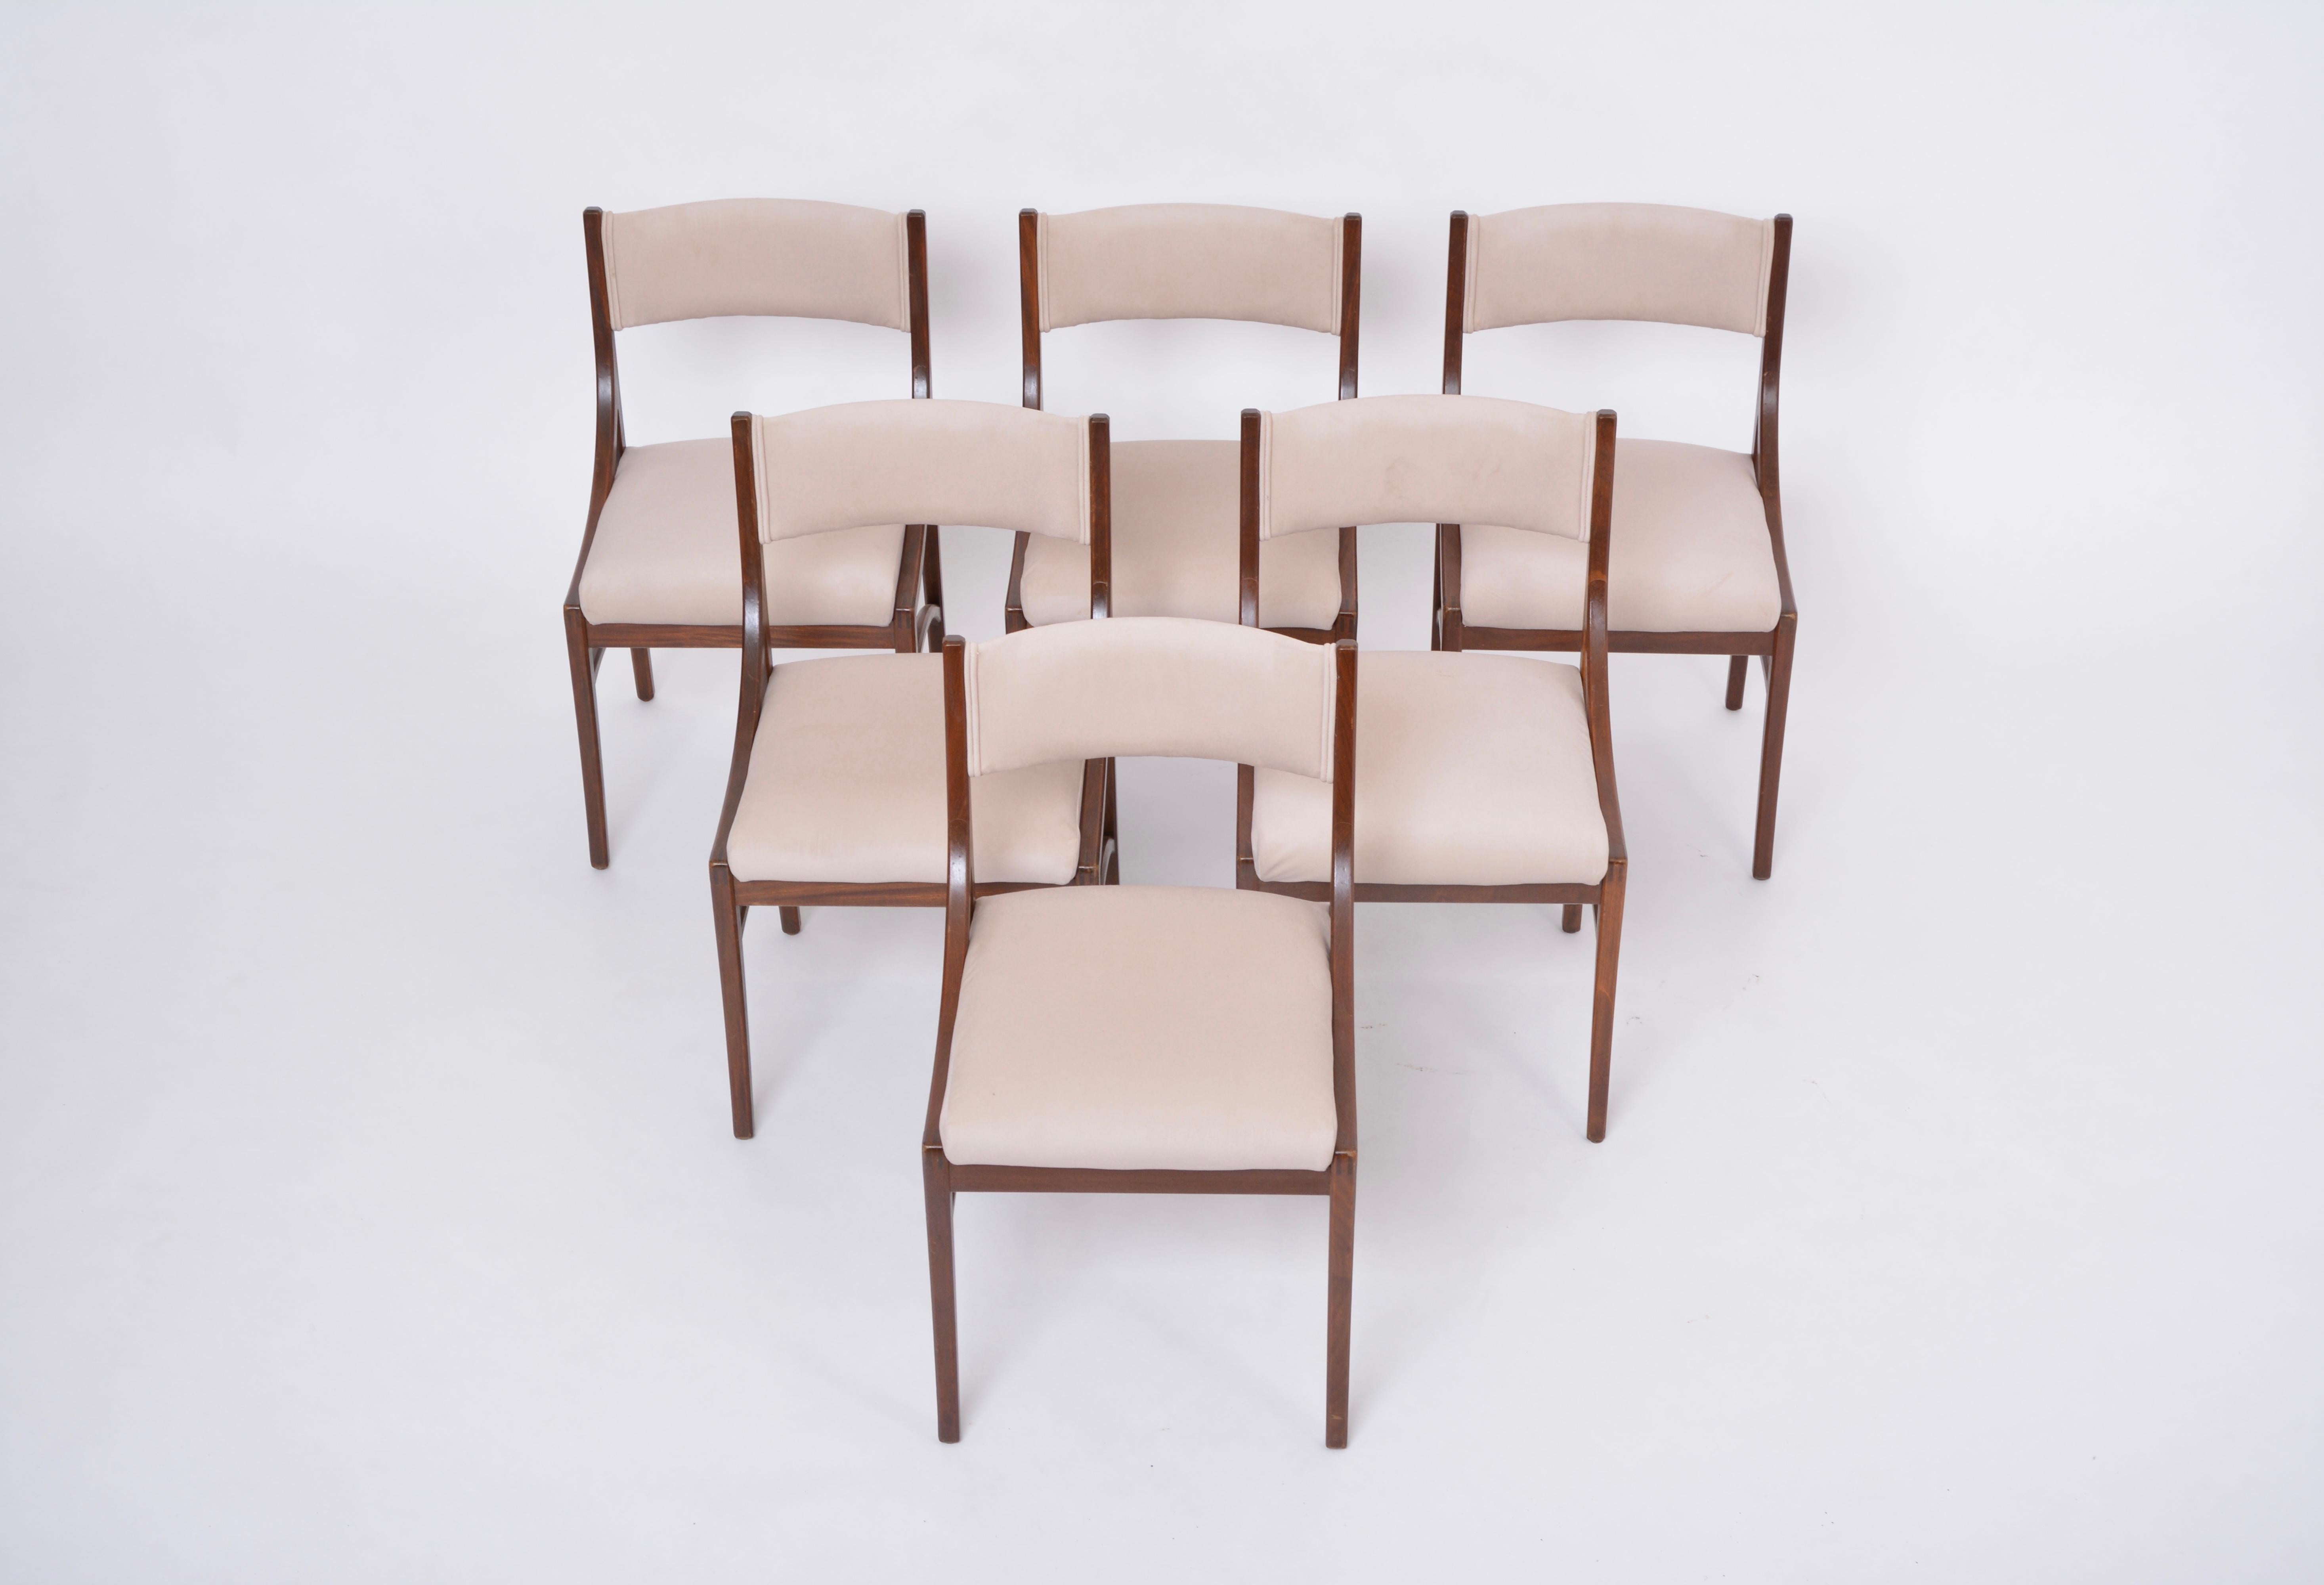 Italian Set of six Mid-Century Modern Beige Dining Chairs by Ico Parisi for Cassina